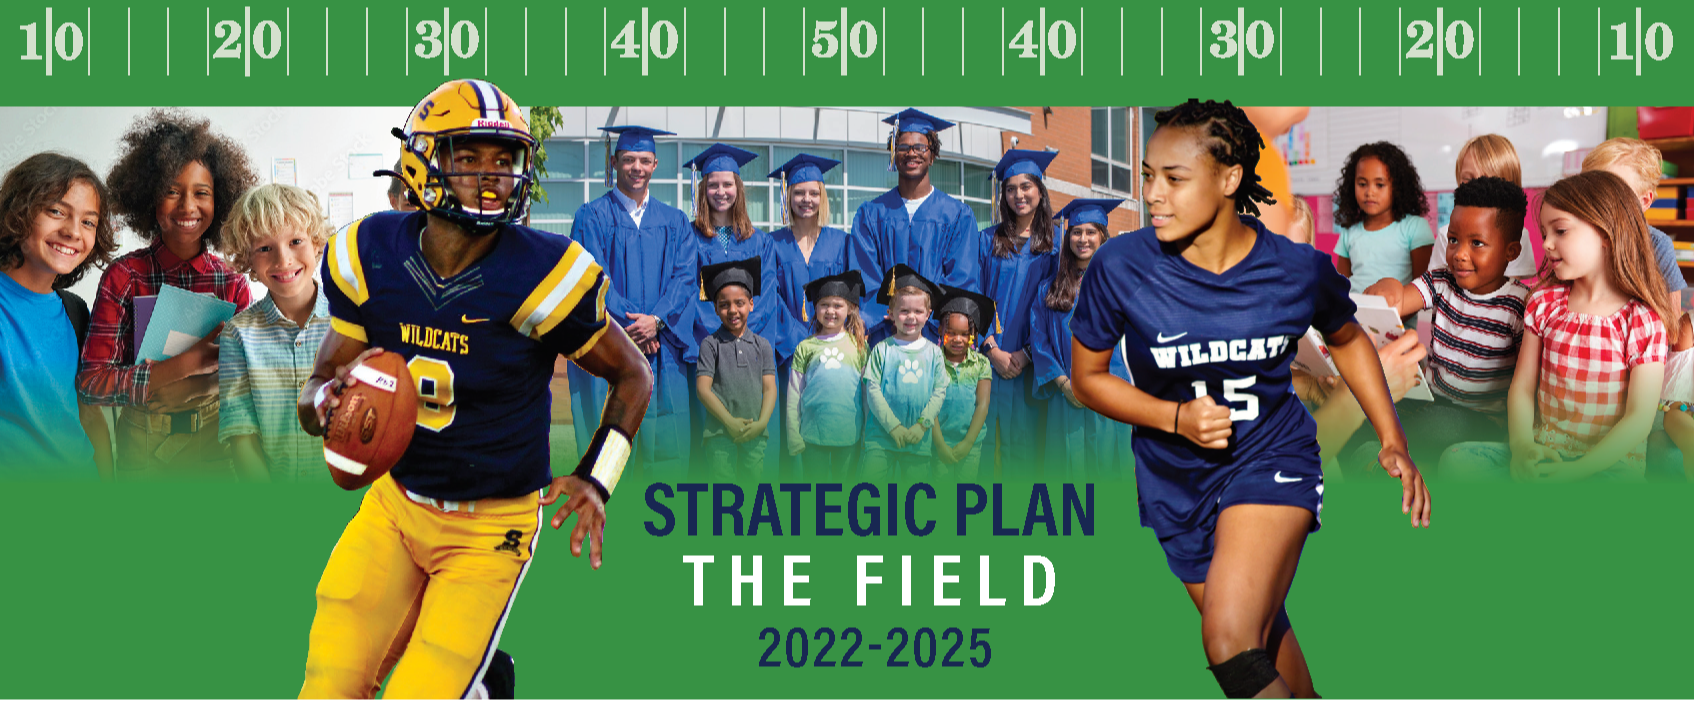 Strategic Plan Header 2022 incudes photos of a football player, a female soccer player, and senior students standing with preschool students